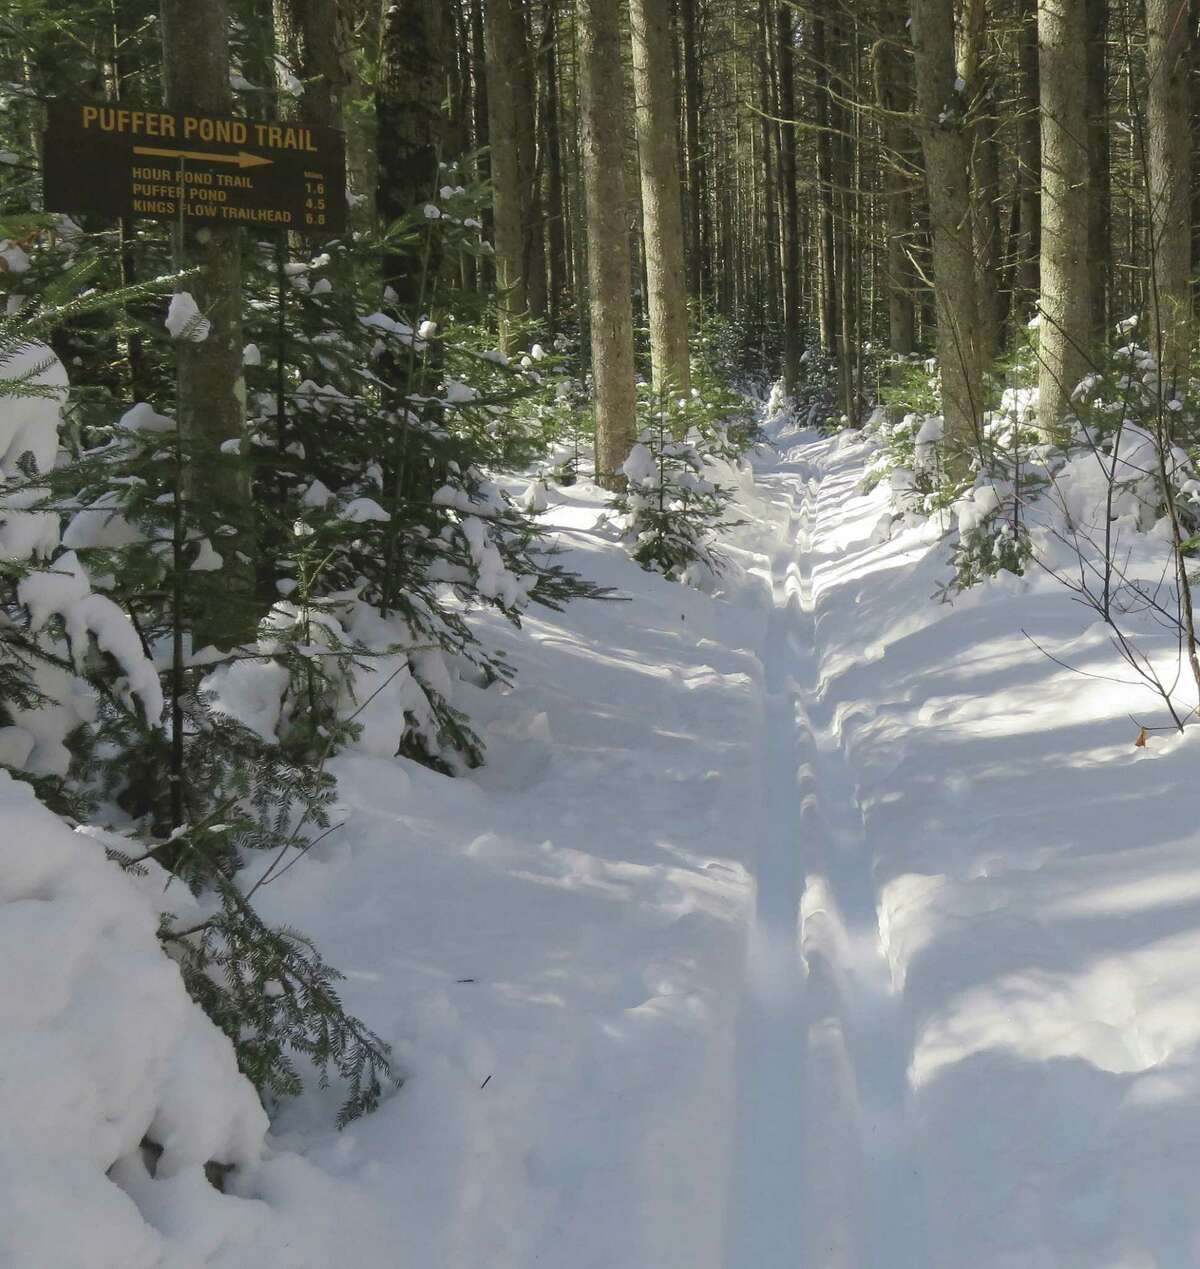 The Hour Pond Loop follows part of the Puffer Pond Trail near Thirteenth Lake in the Central Adirondacks. A newly convened state task force will attempt to settle trail maintenance issues after a landmark court decision. (Herb Terns/Times Union archive)